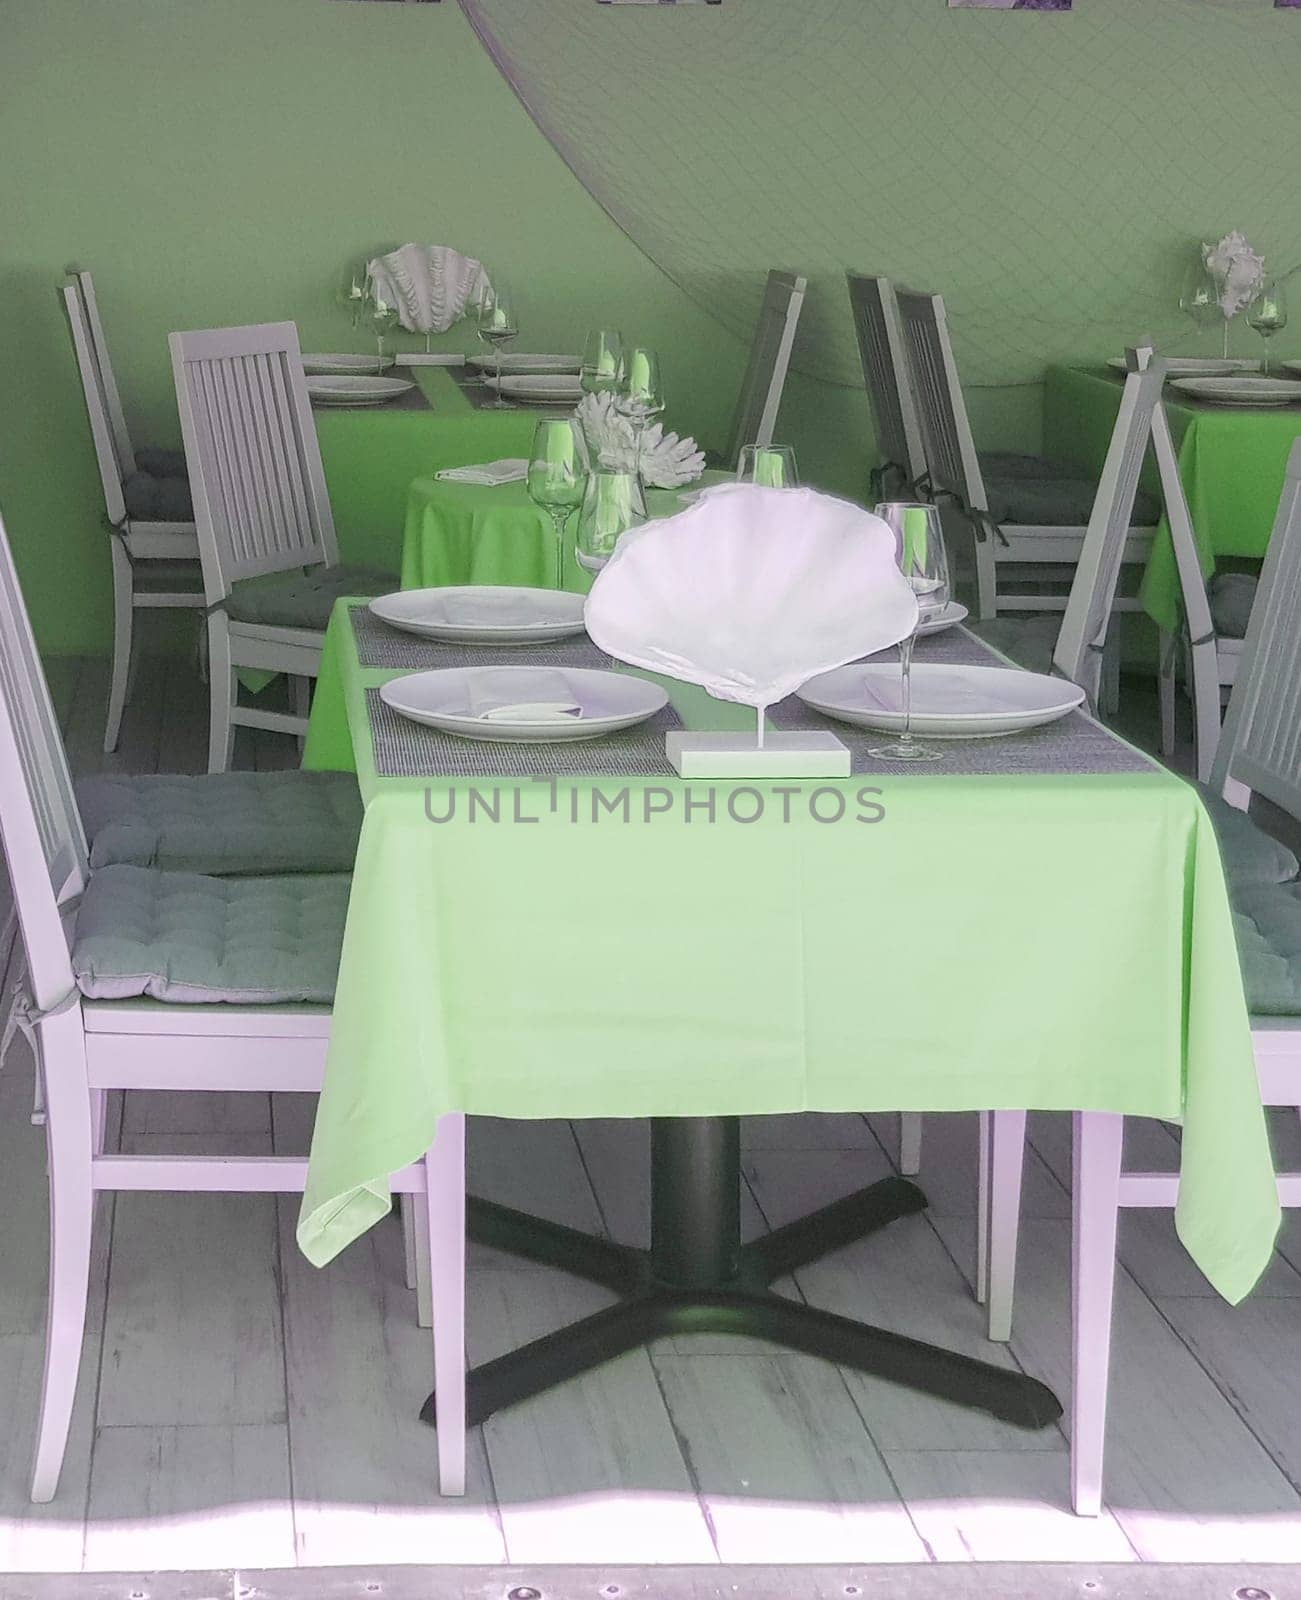 Beautiful table setting with glasses, tablecloth, plates in a nautical style in a fish restaurant, green tinting.